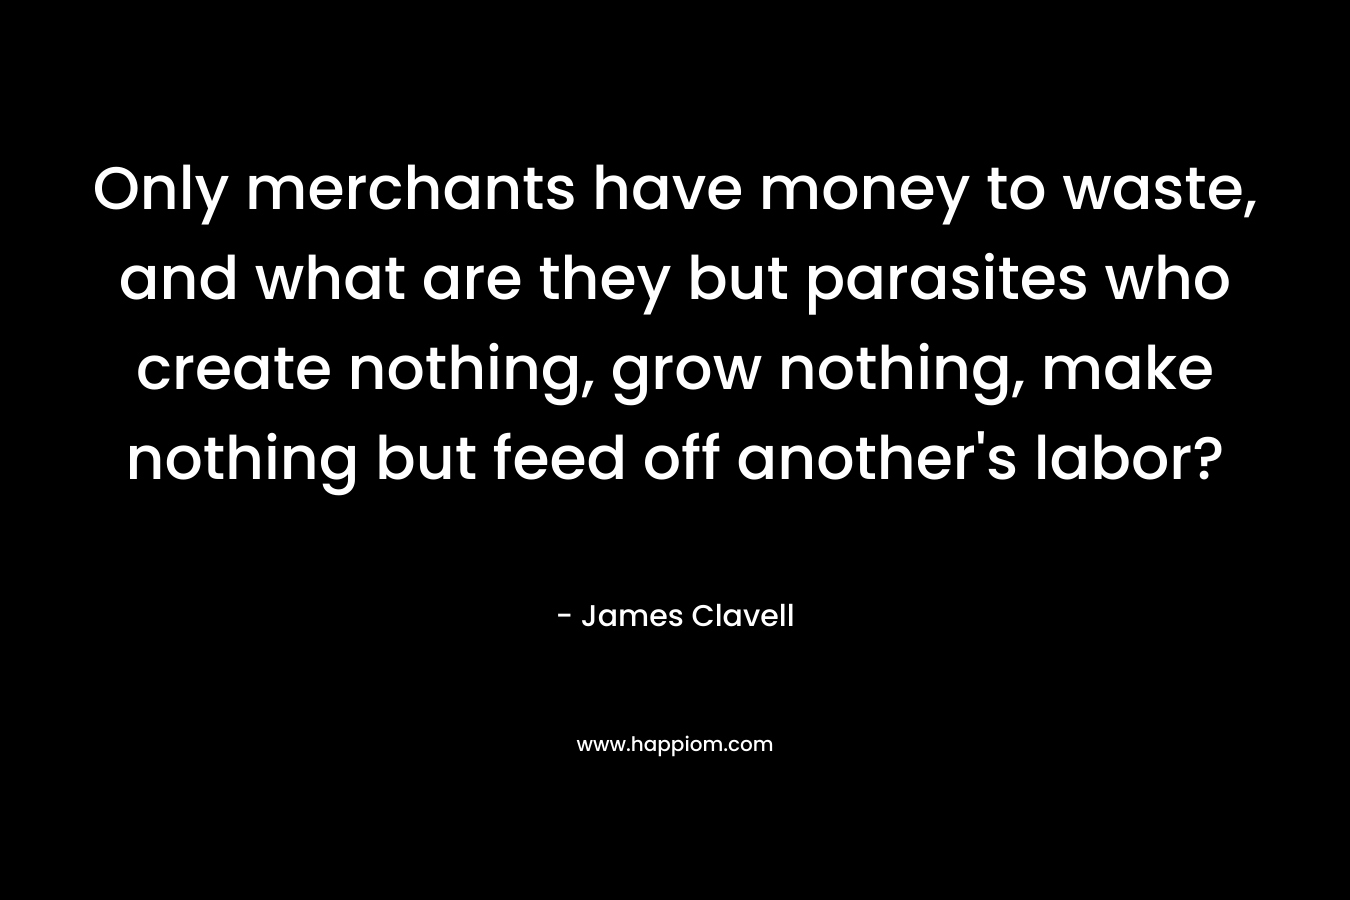 Only merchants have money to waste, and what are they but parasites who create nothing, grow nothing, make nothing but feed off another’s labor? – James Clavell